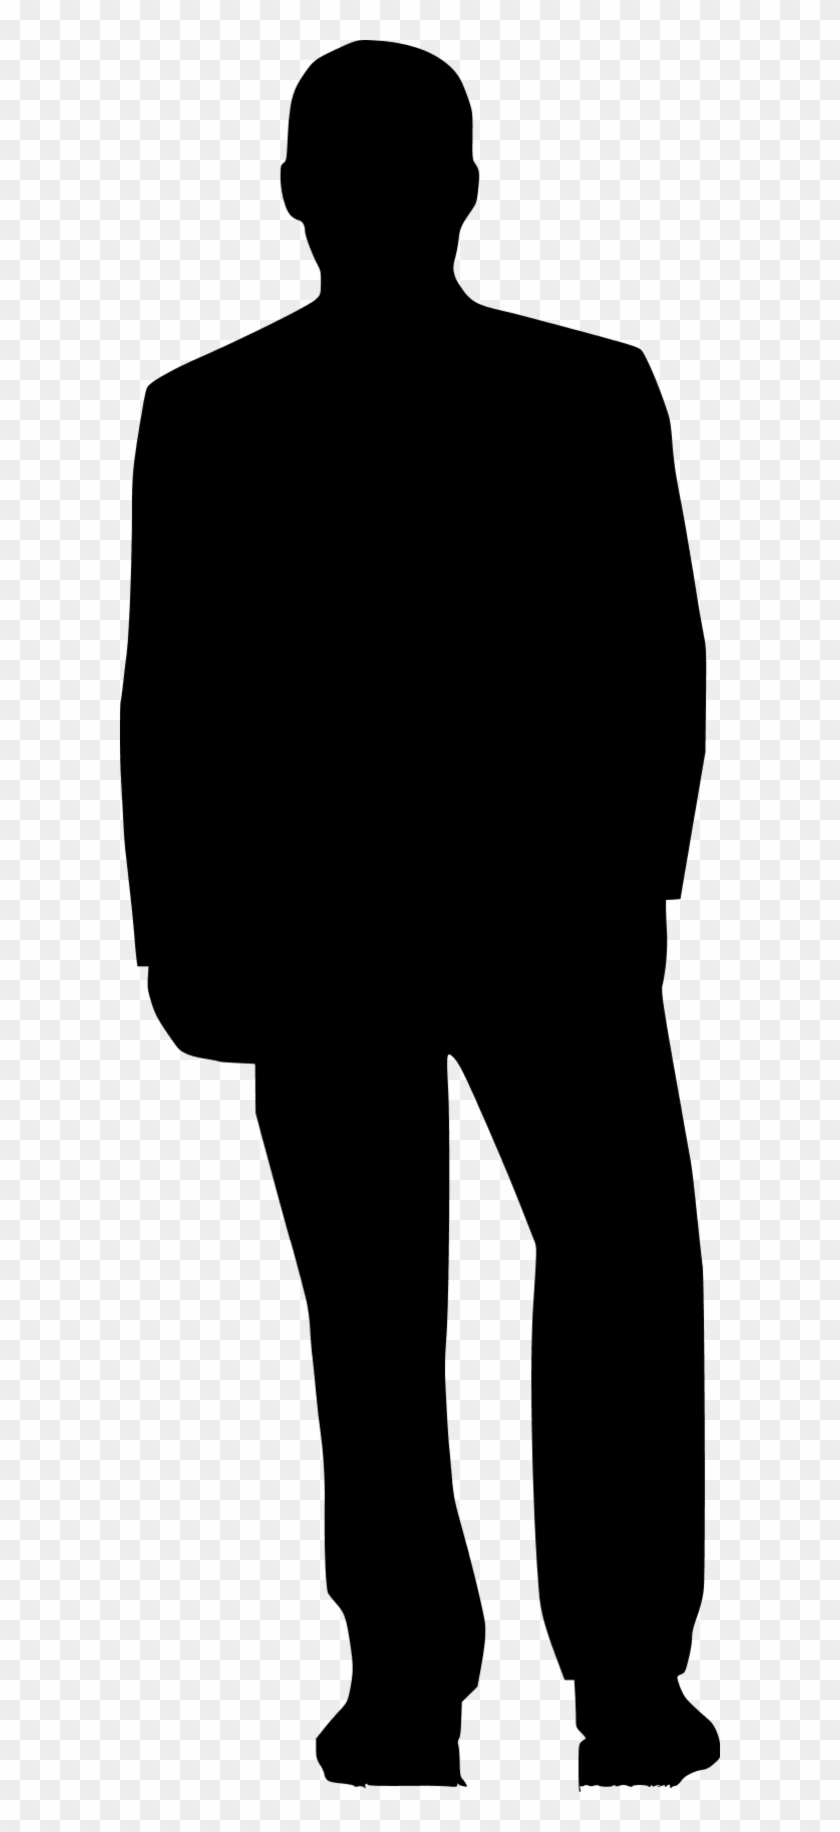 Person Back Silhouette Png - Free Transparent PNG Clipart Images Download